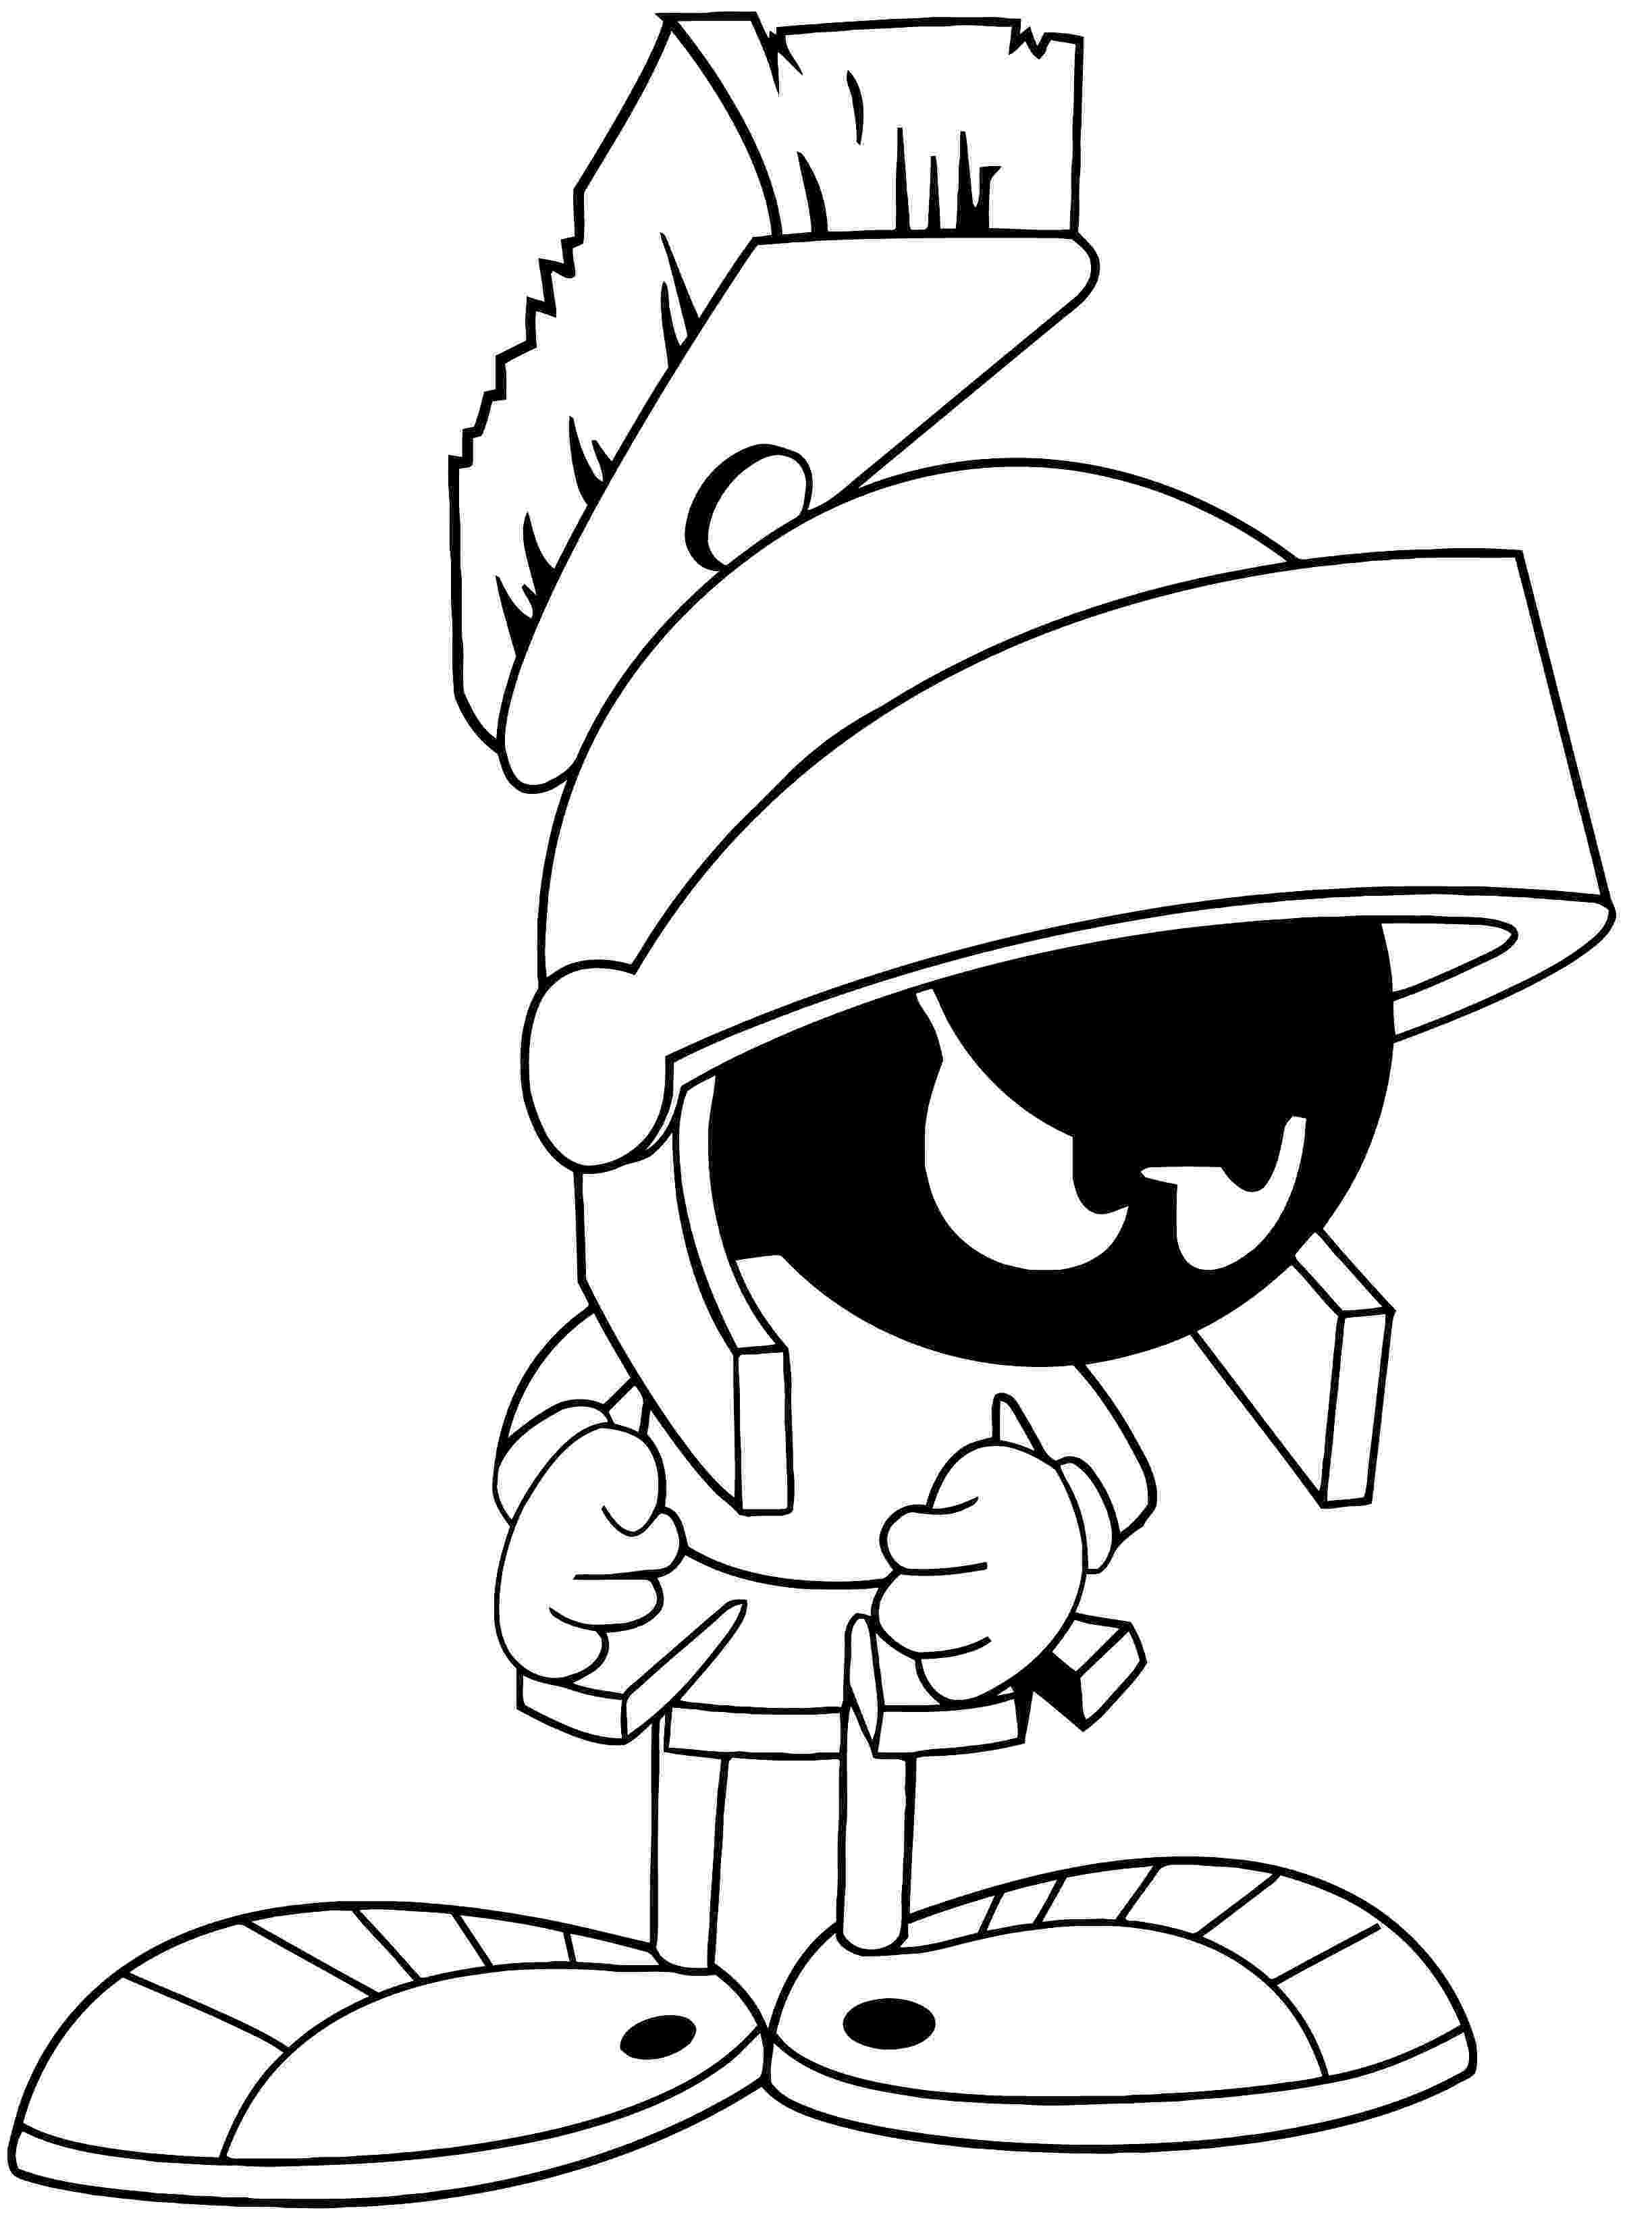 baby marvin the martian nerseanolo marvin the martian wallpaper marvin baby the martian 